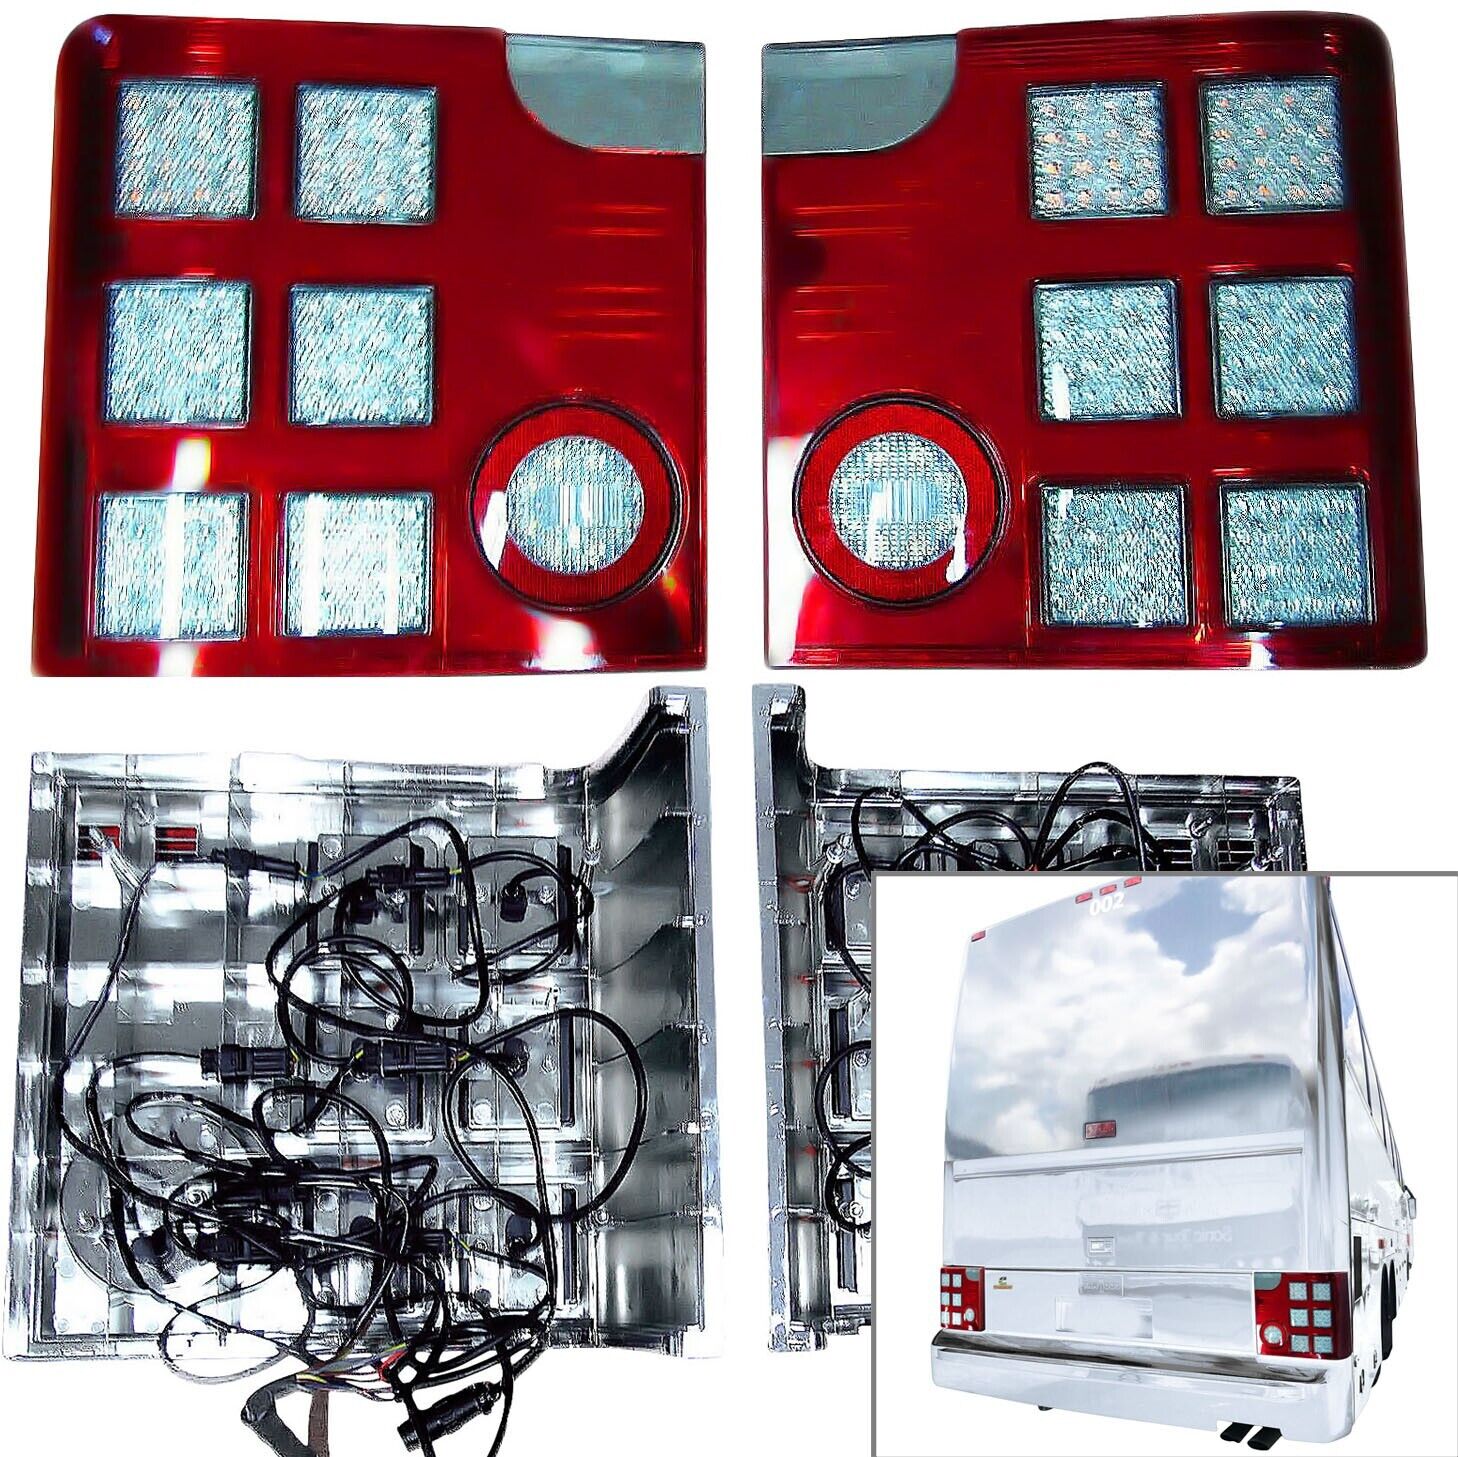 Replacement LED Tail Lights - 1997-2013 Van Hool T Series Buses (Left and Right)